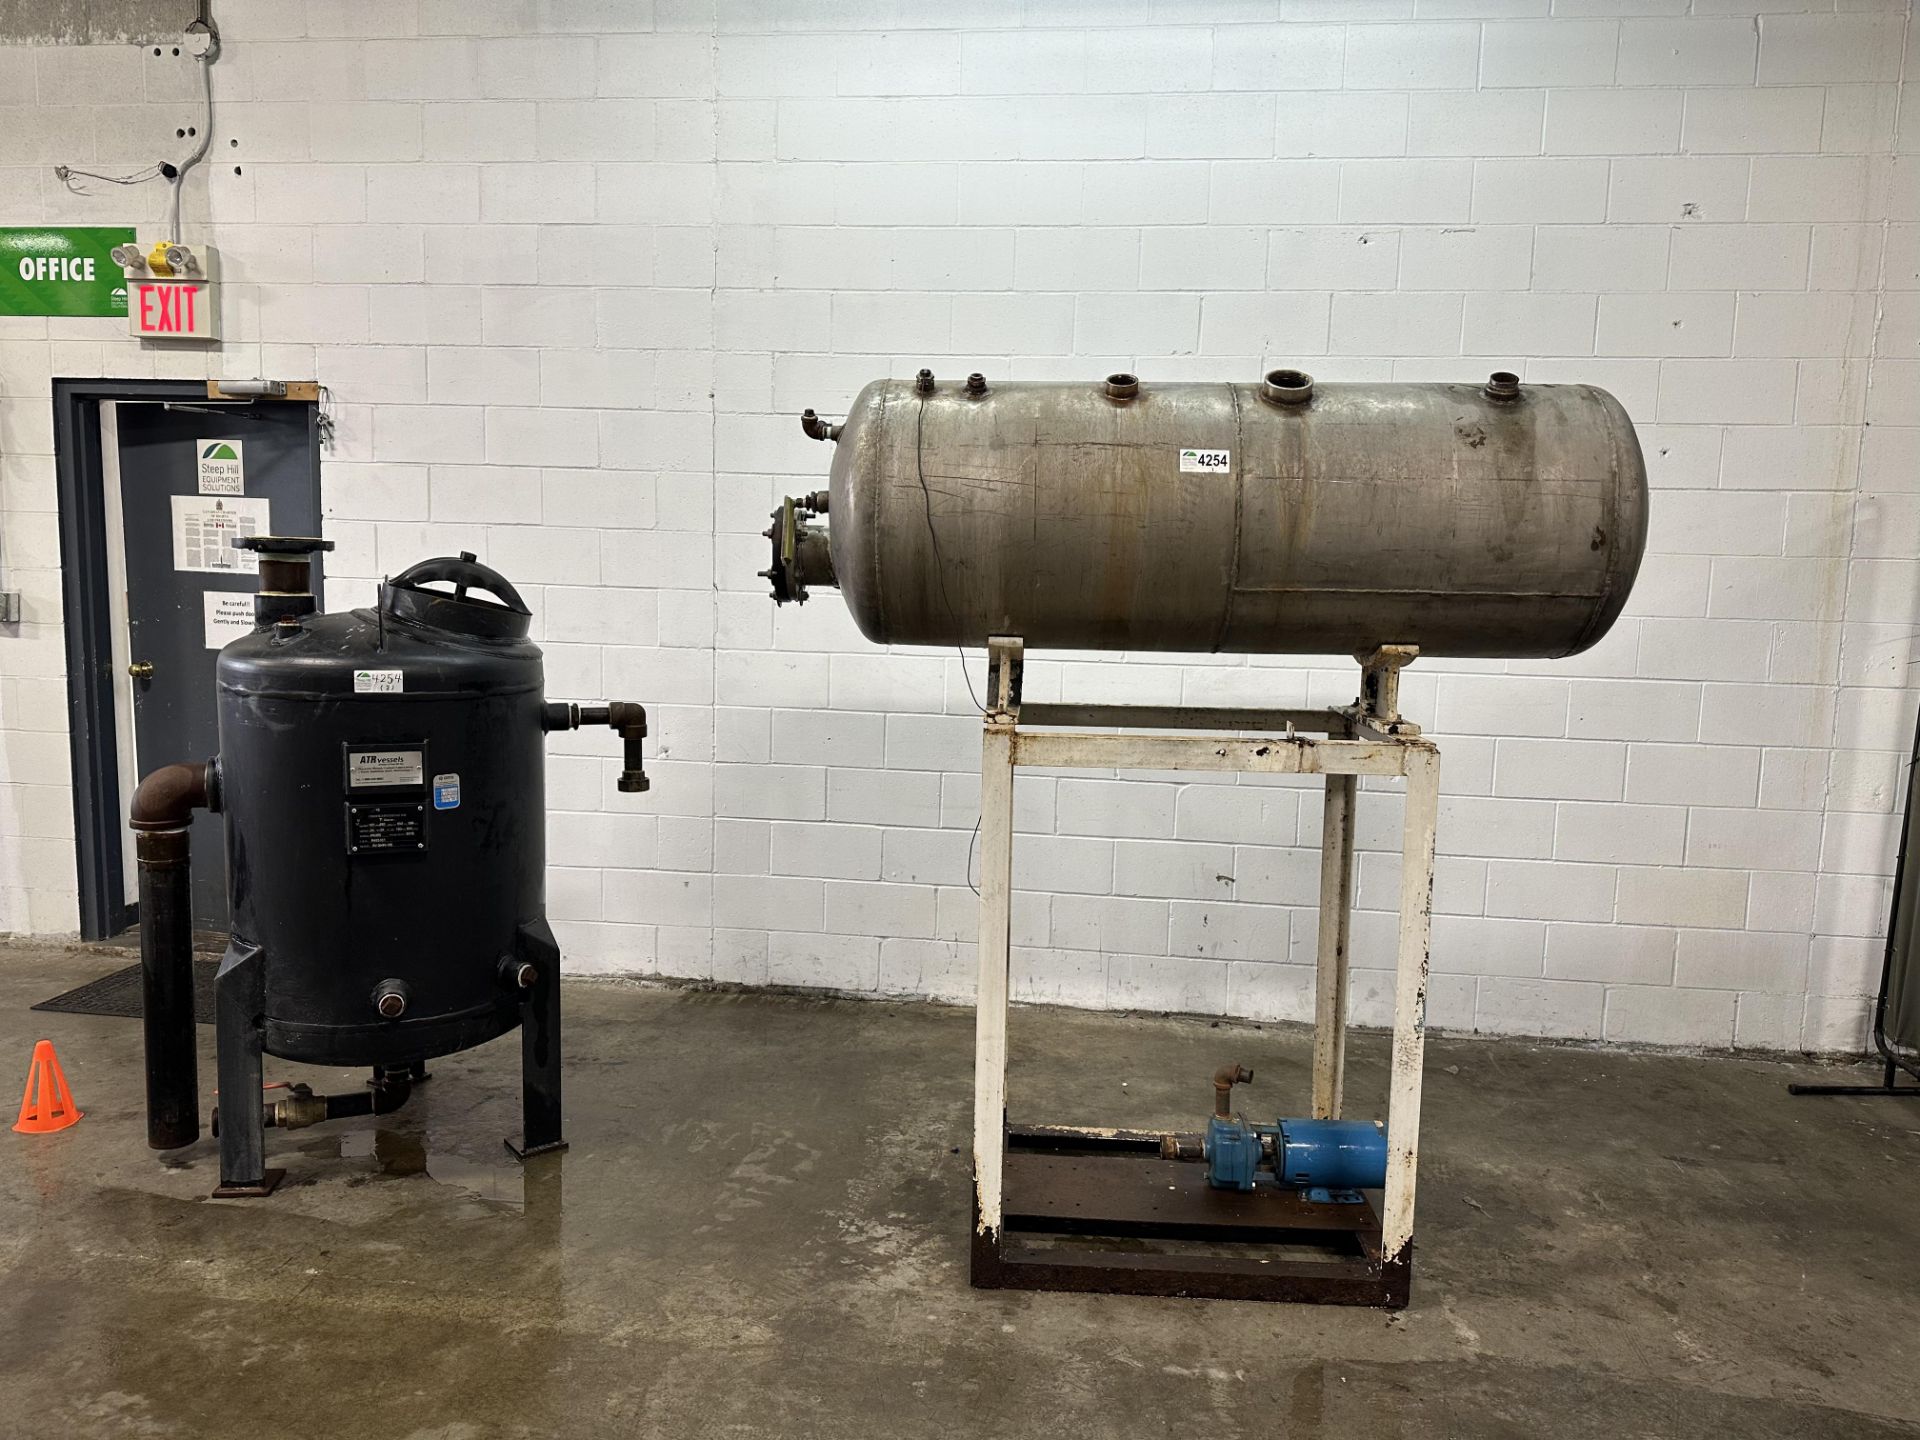 Fulton Boiler 50 HP - Natural Gas Boiler rated for 1725lbs Steam/hr. Fire/Water jackets are in - Image 9 of 20